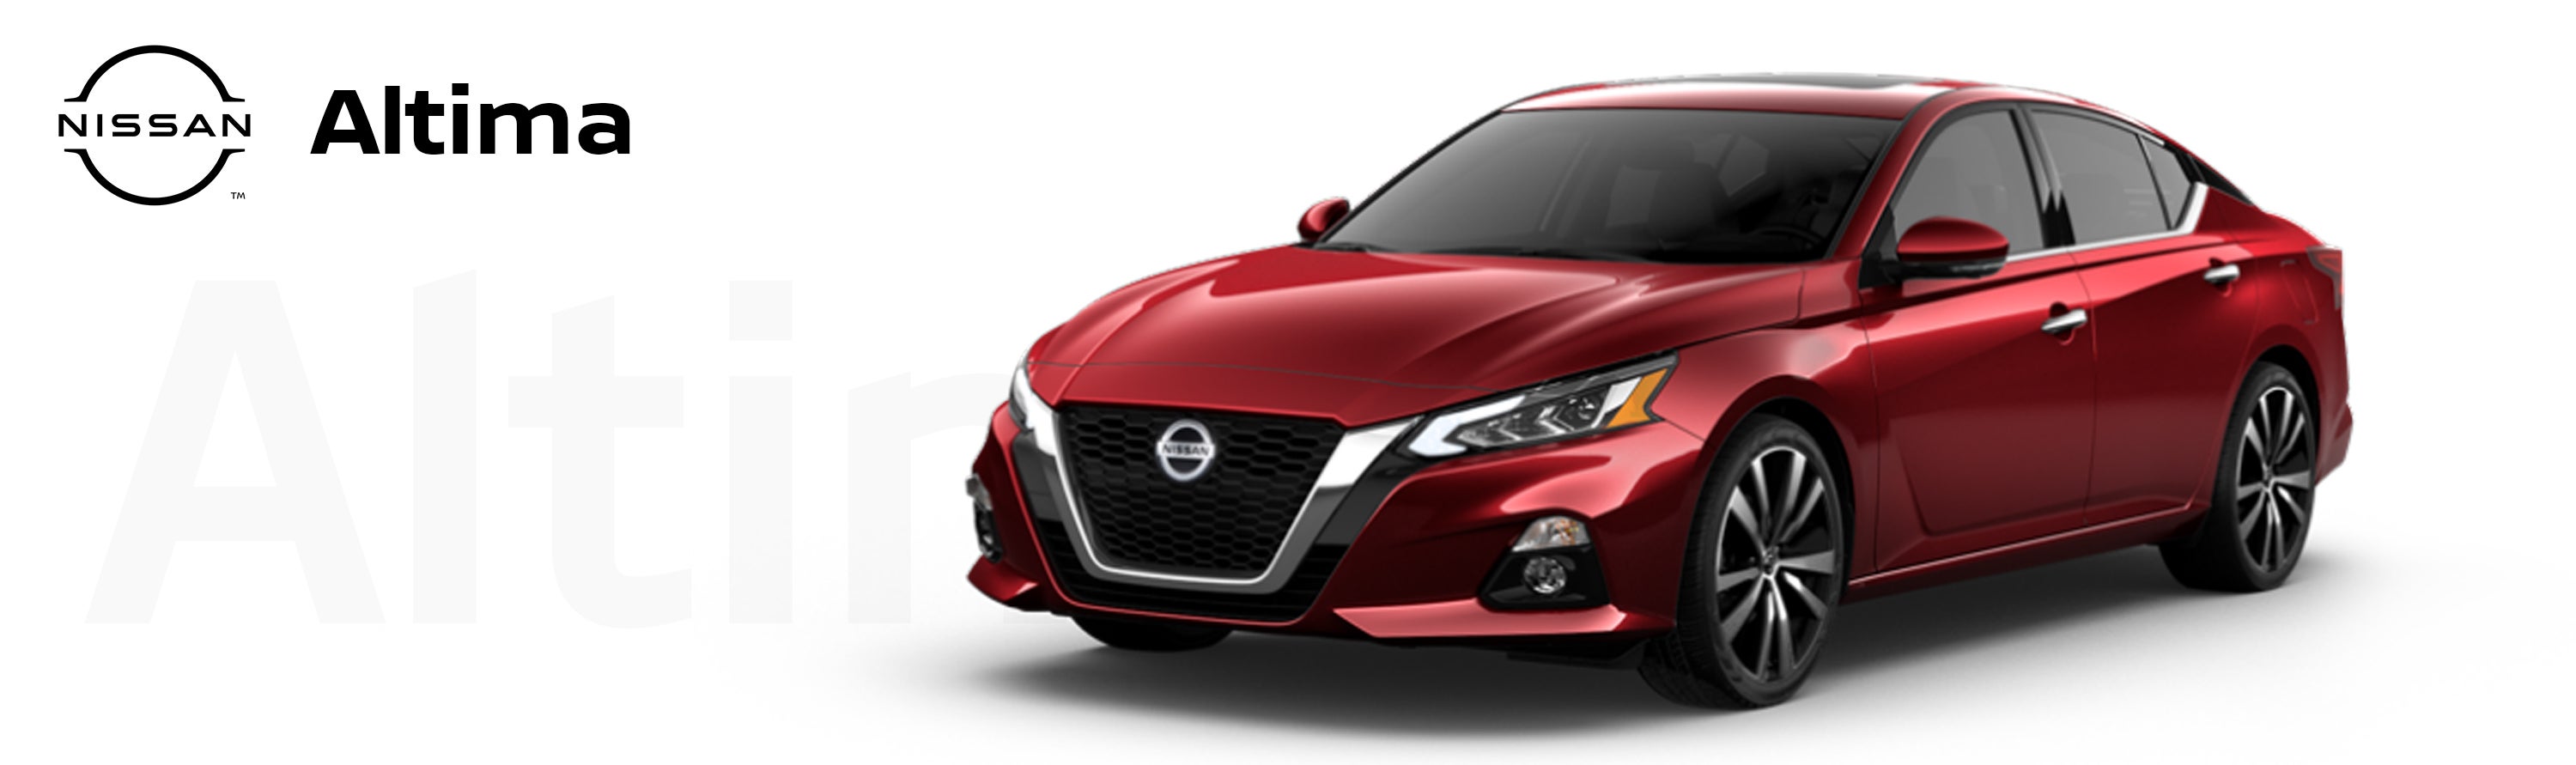 2020 Nissan Altima at Clay Cooley Nissan of Irving in Irving TX